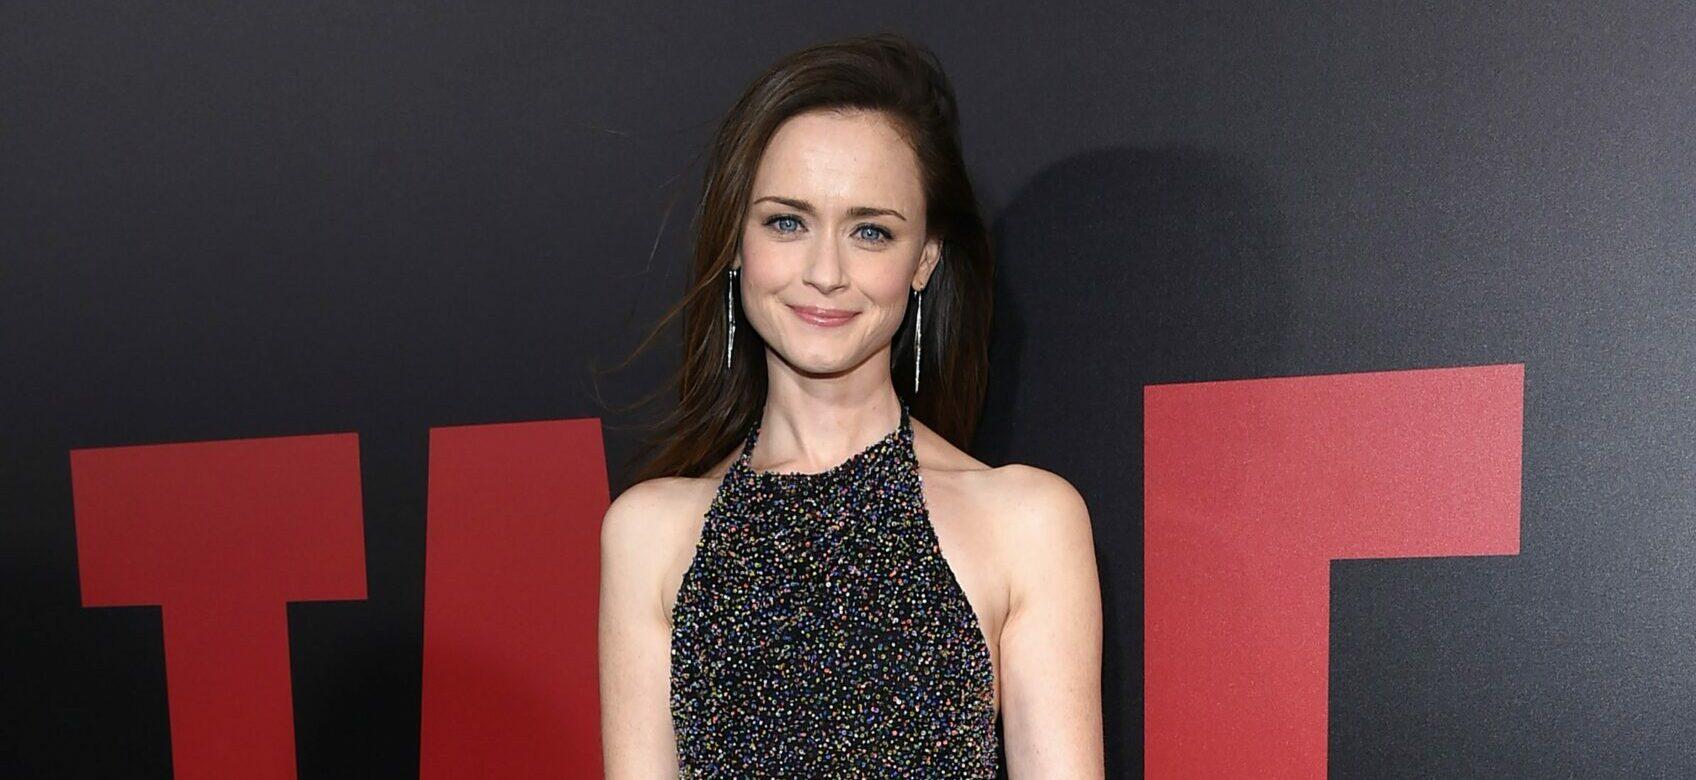 A photo showing Alexis Bledel, the star of 'Gilmore Gilrs.'